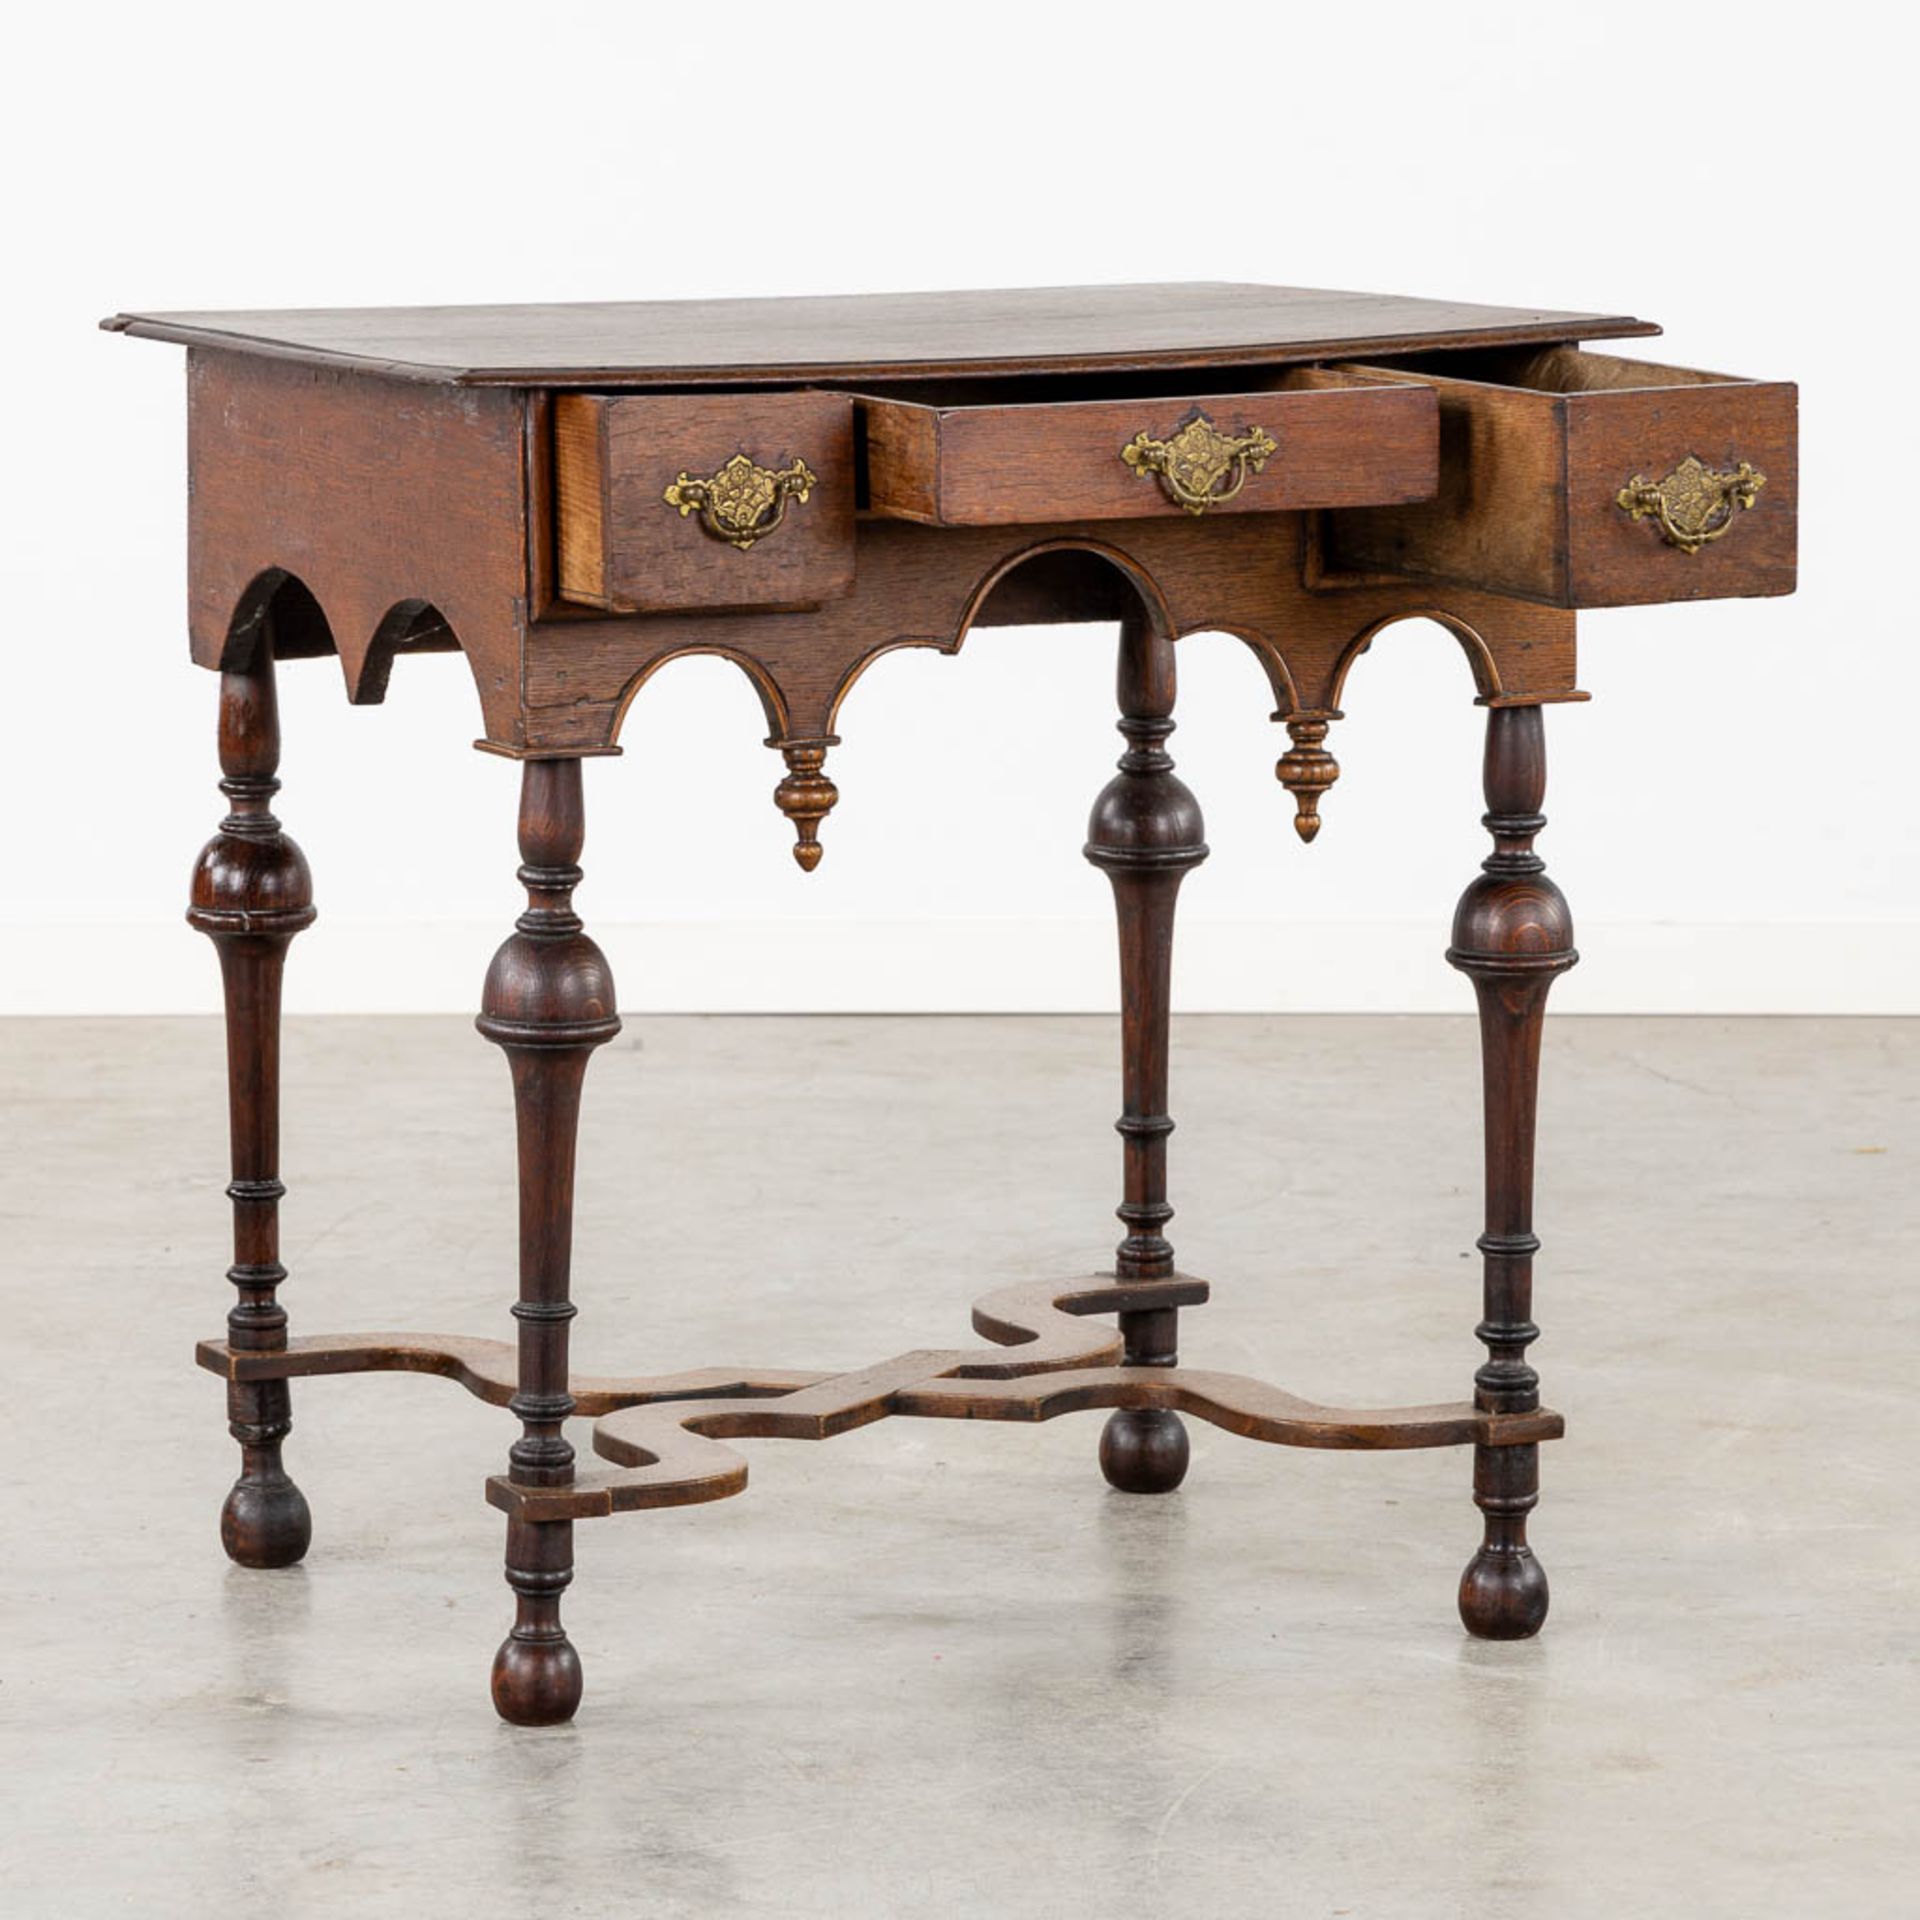 An antique oak 'Pay Table', The Netherlands, 18th C. (L:53 x W:69 x H:70 cm) - Image 3 of 11